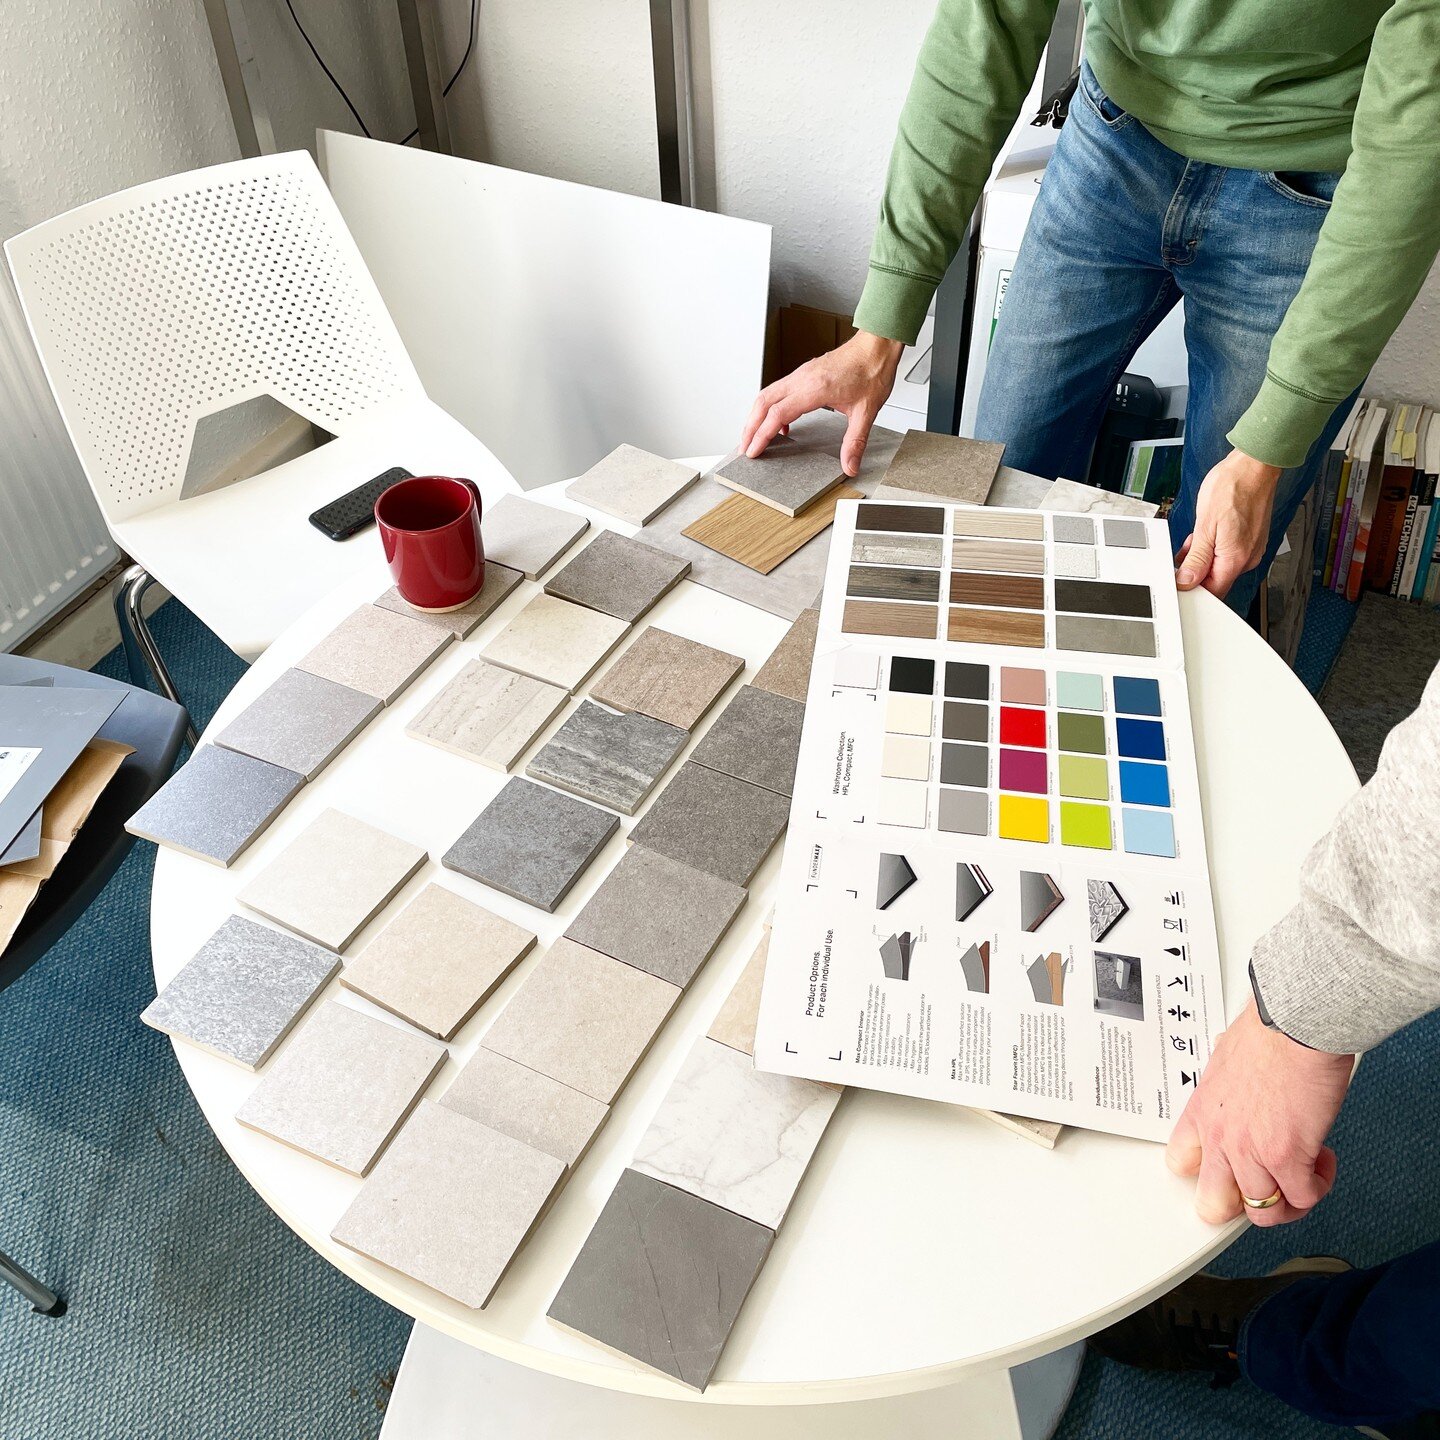 Choosing finishes and colour schemes for a school project. Must be nearing completion&hellip;&hellip;
#architect #architecture #toomuchchoice #interior #walltiles #floortiles #solusceramics